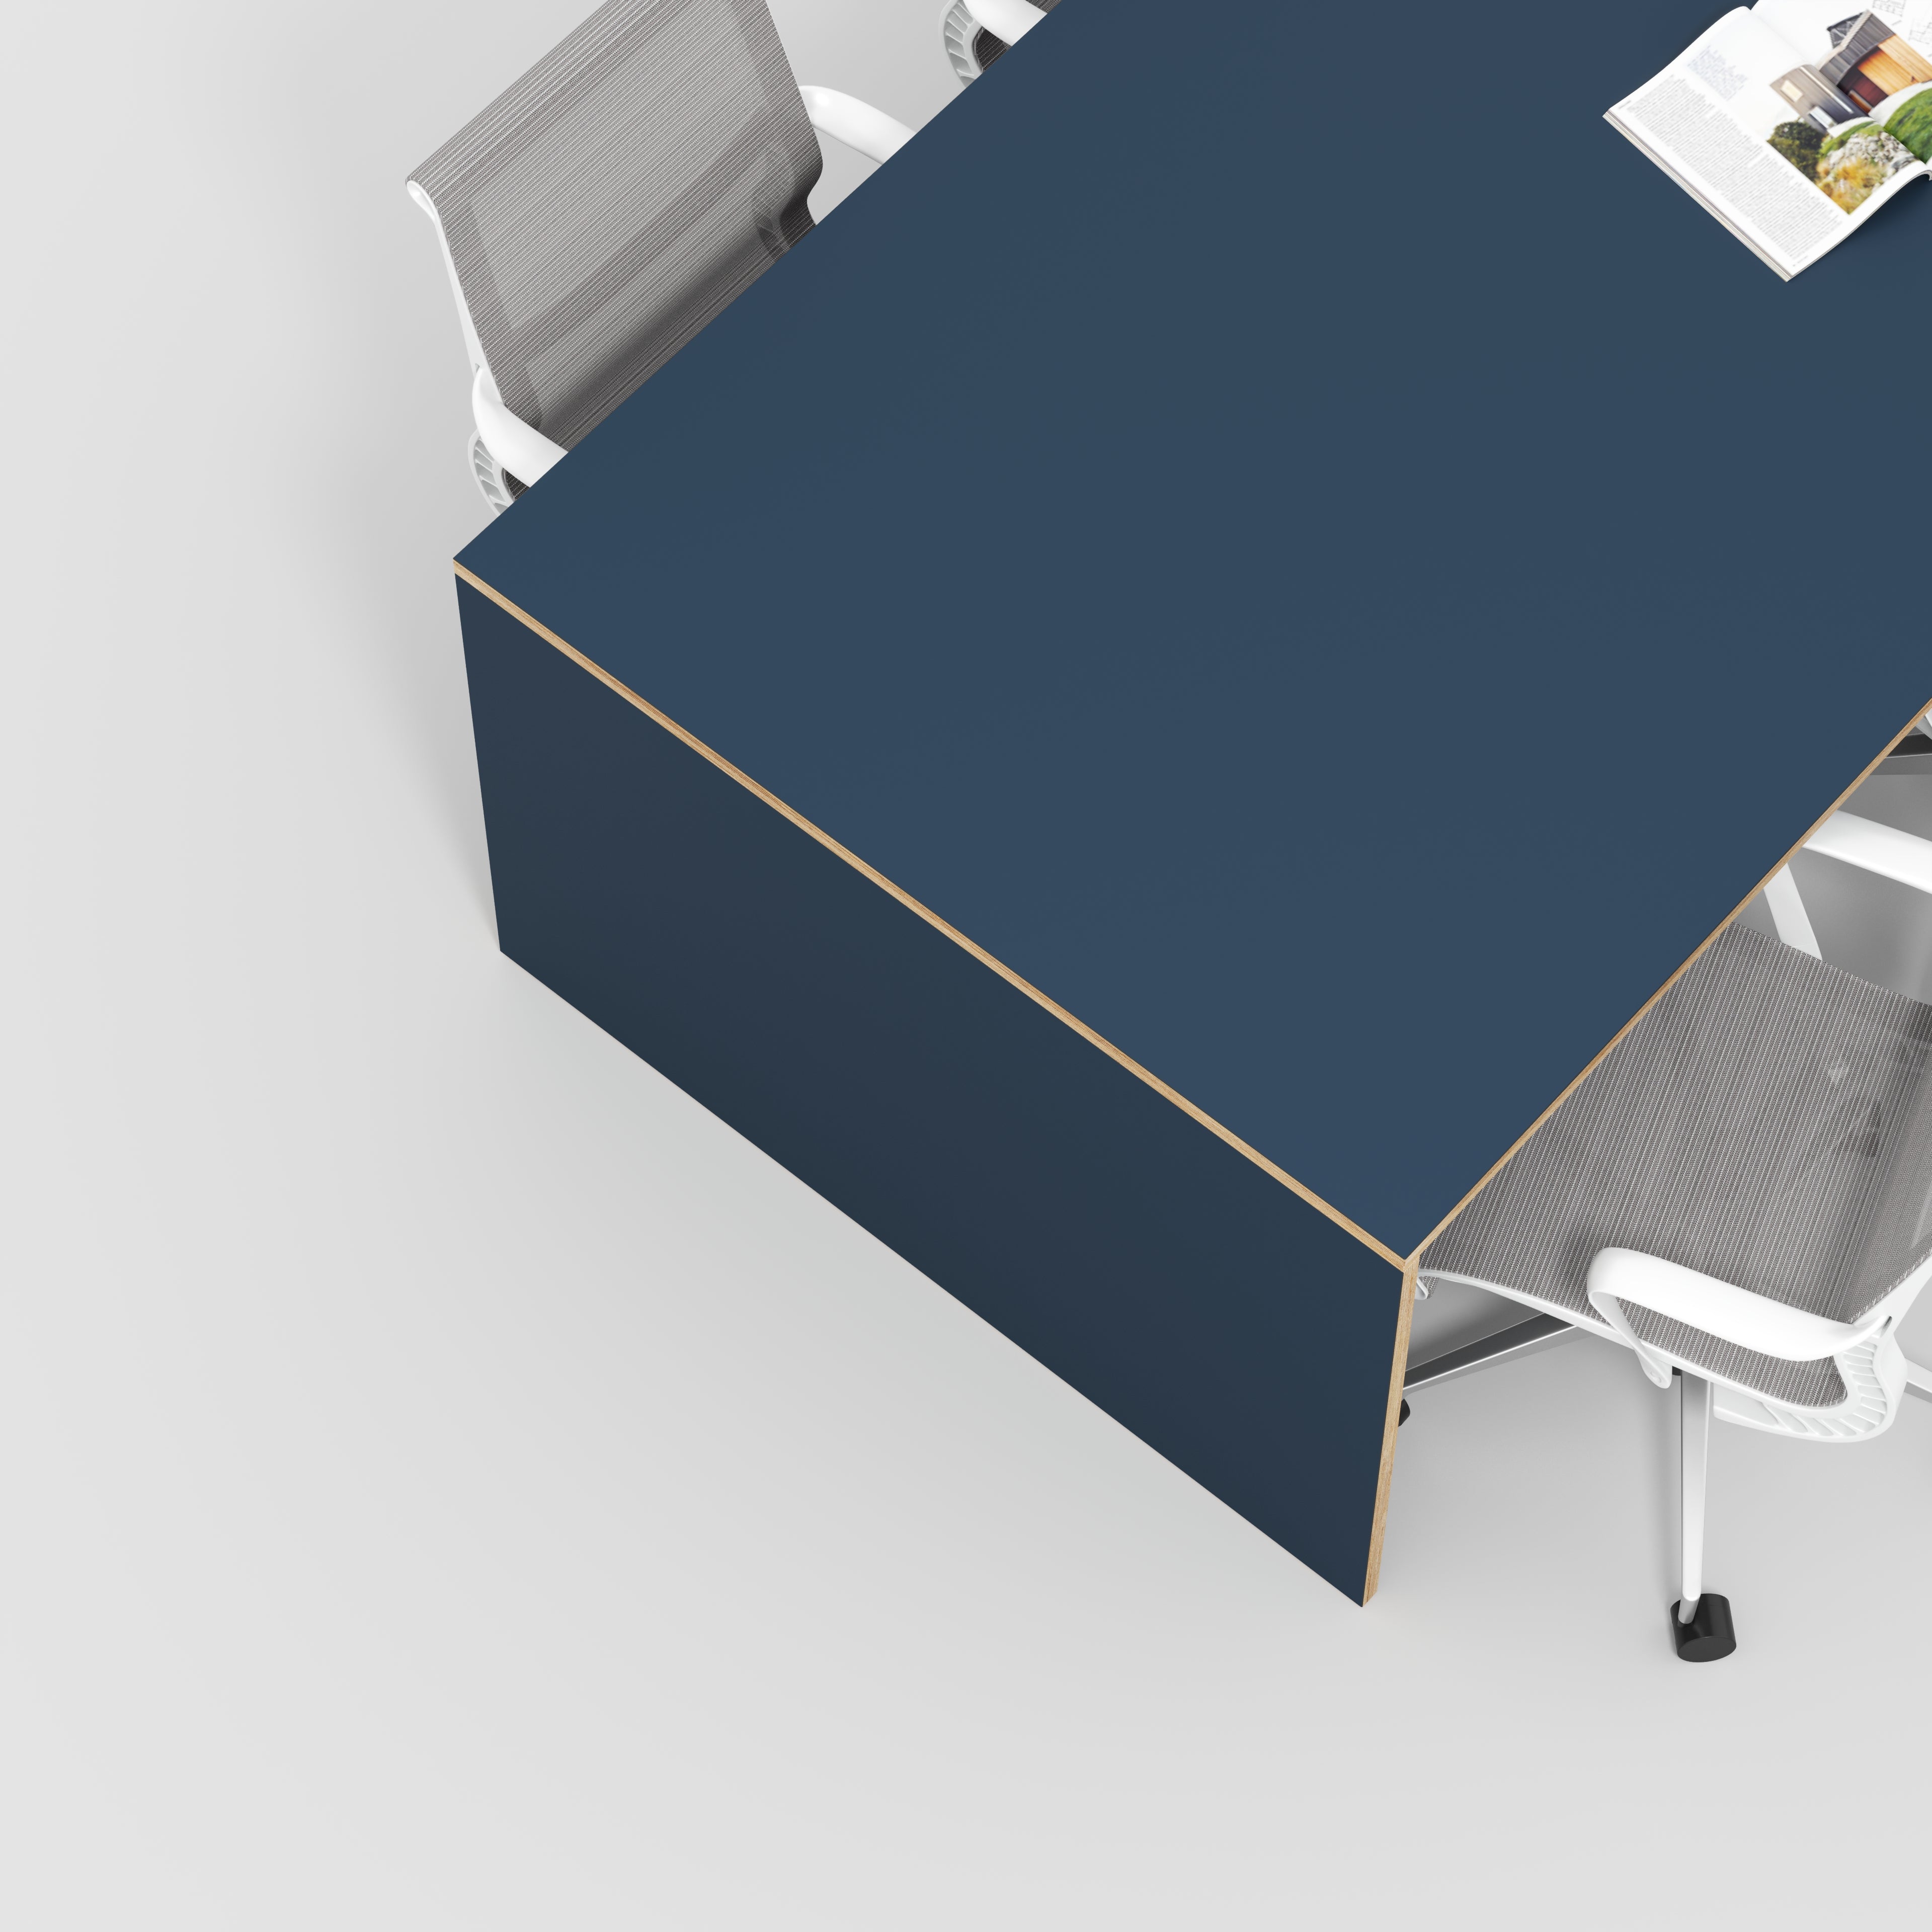 Plywood Table with Solid Sides - Formica Night Sea Blue - 2400(w) x 1200(d) x 750(h)